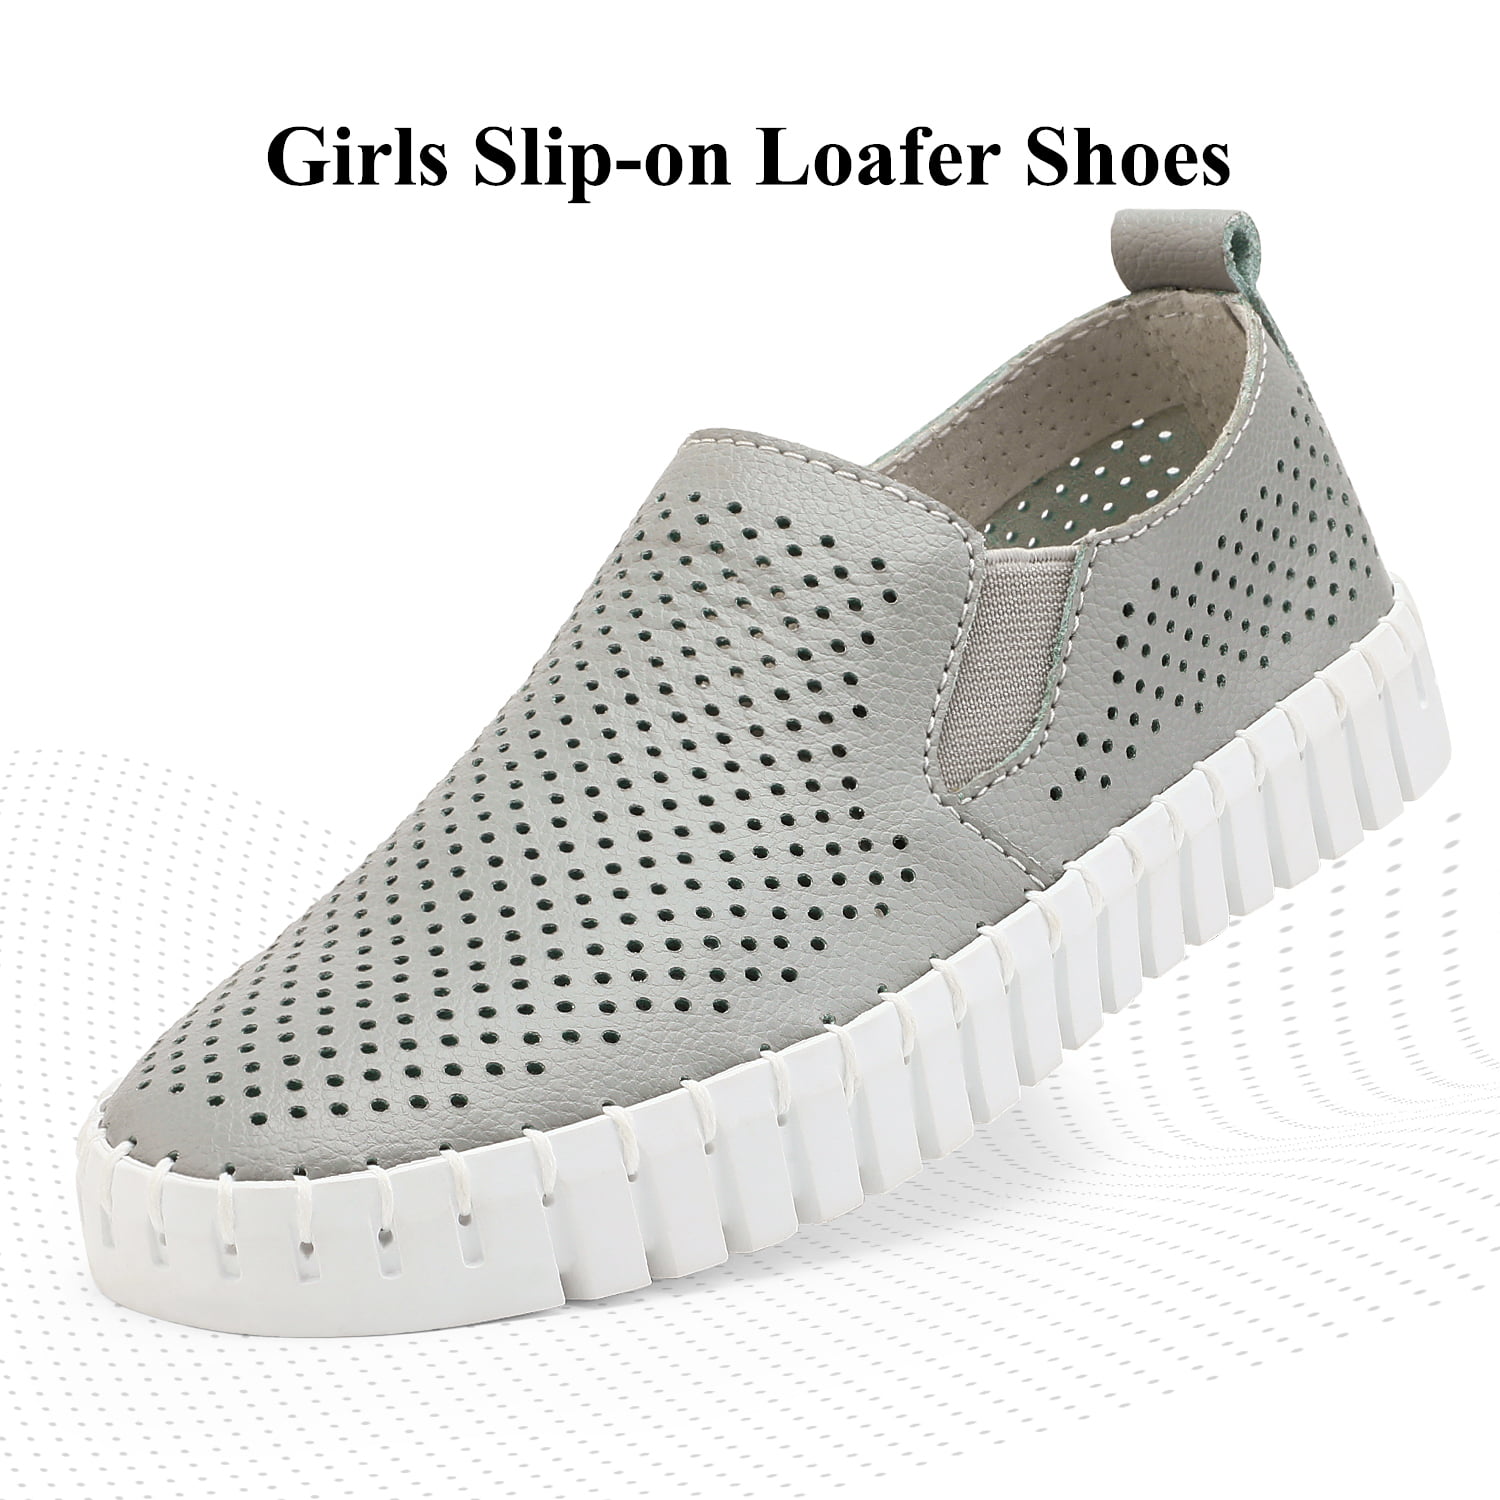 DREAM PAIRS Girls Slip-on Sneakers Comfortable Loafer Shoes 